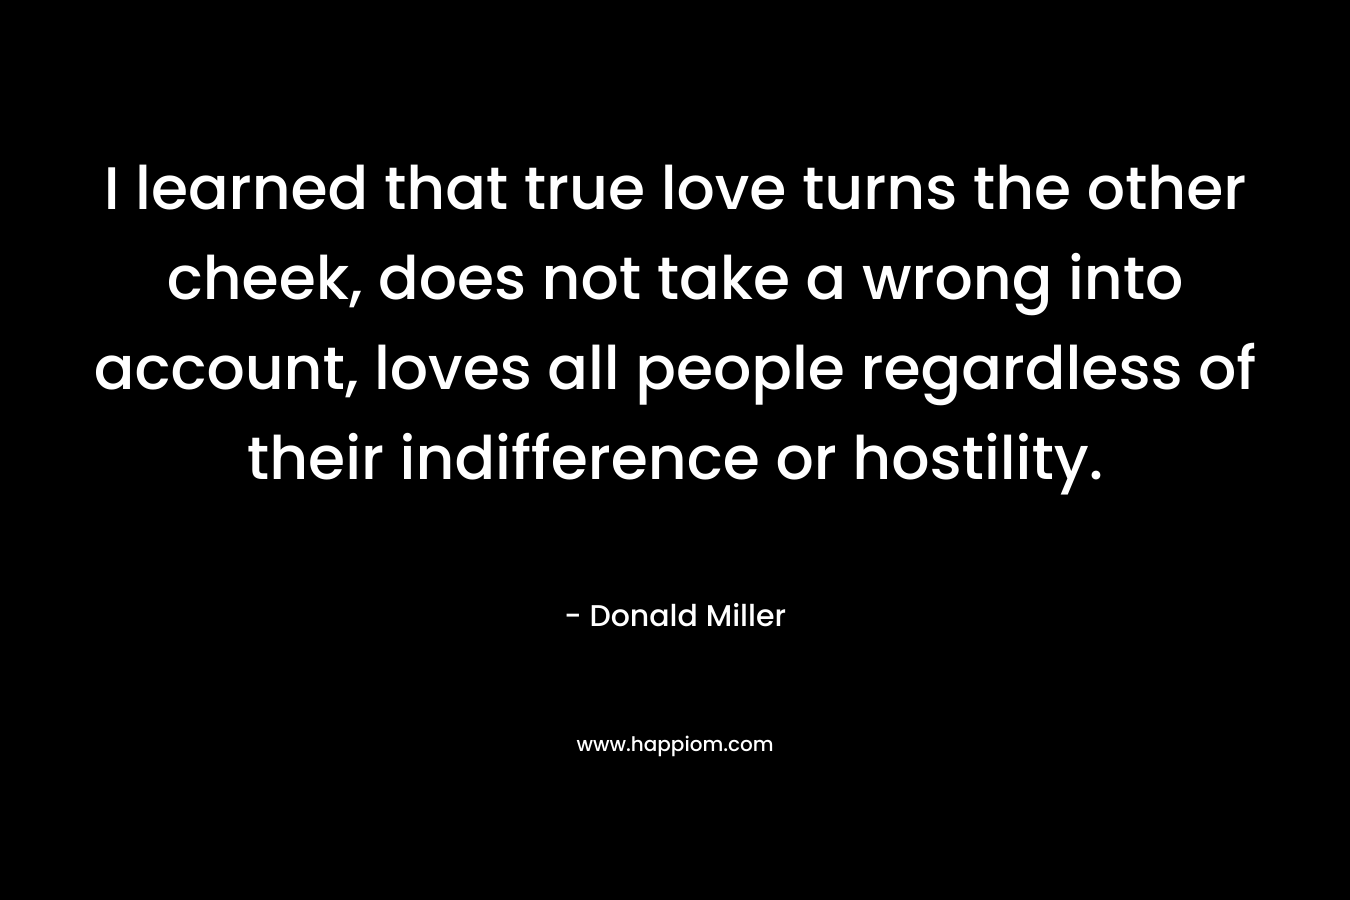 I learned that true love turns the other cheek, does not take a wrong into account, loves all people regardless of their indifference or hostility. – Donald Miller